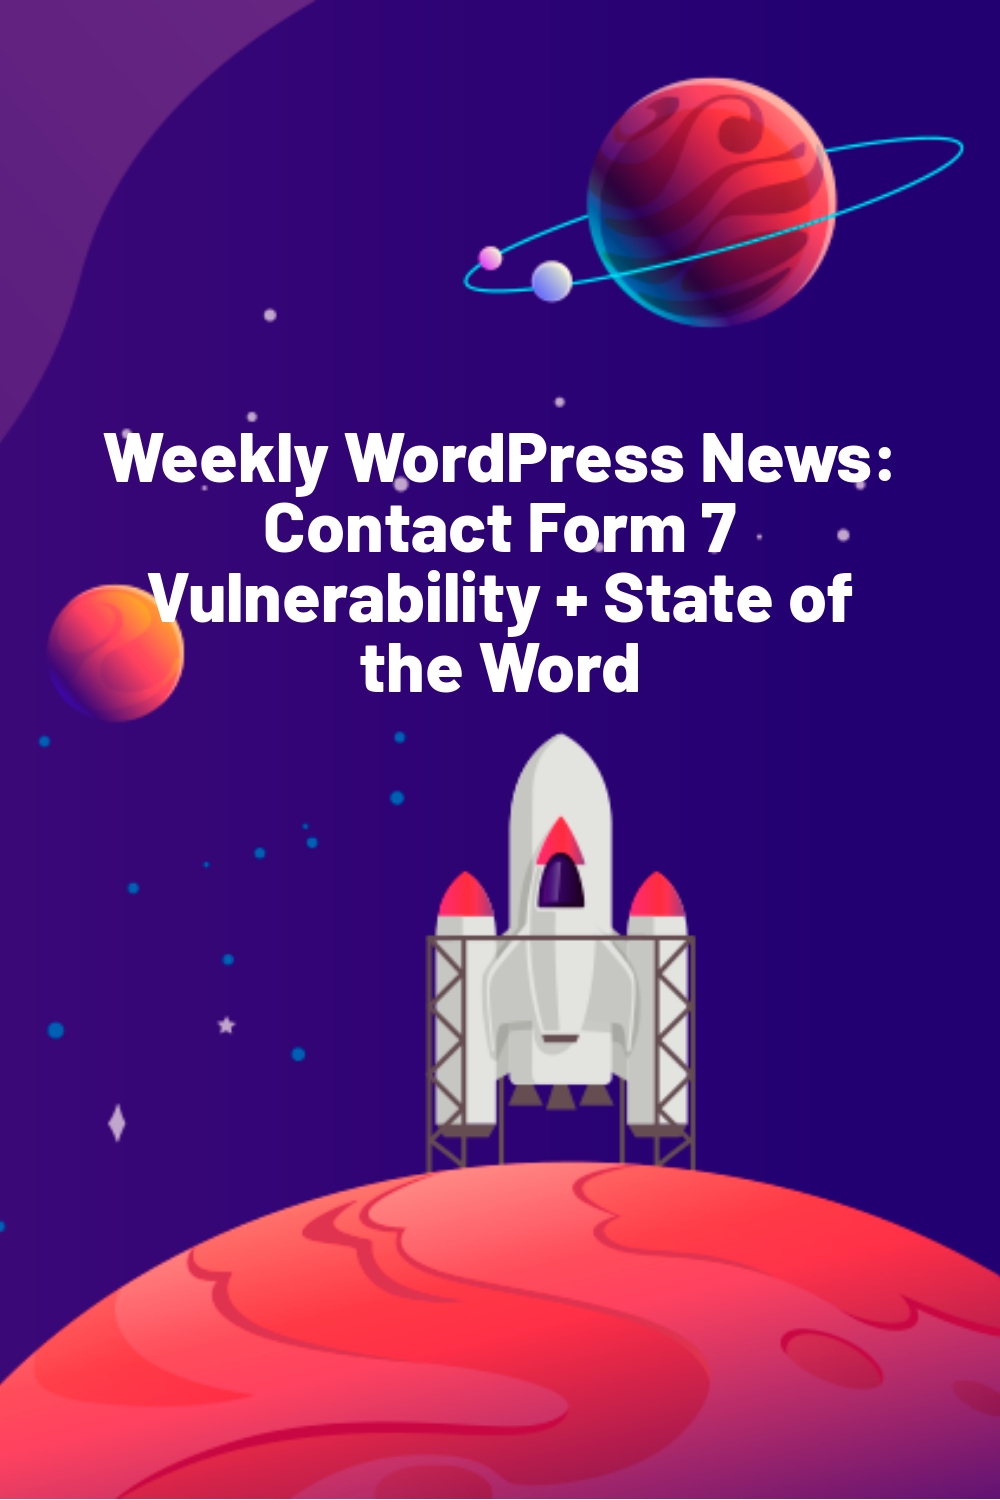 Weekly WordPress News: Contact Form 7 Vulnerability + State of the Word